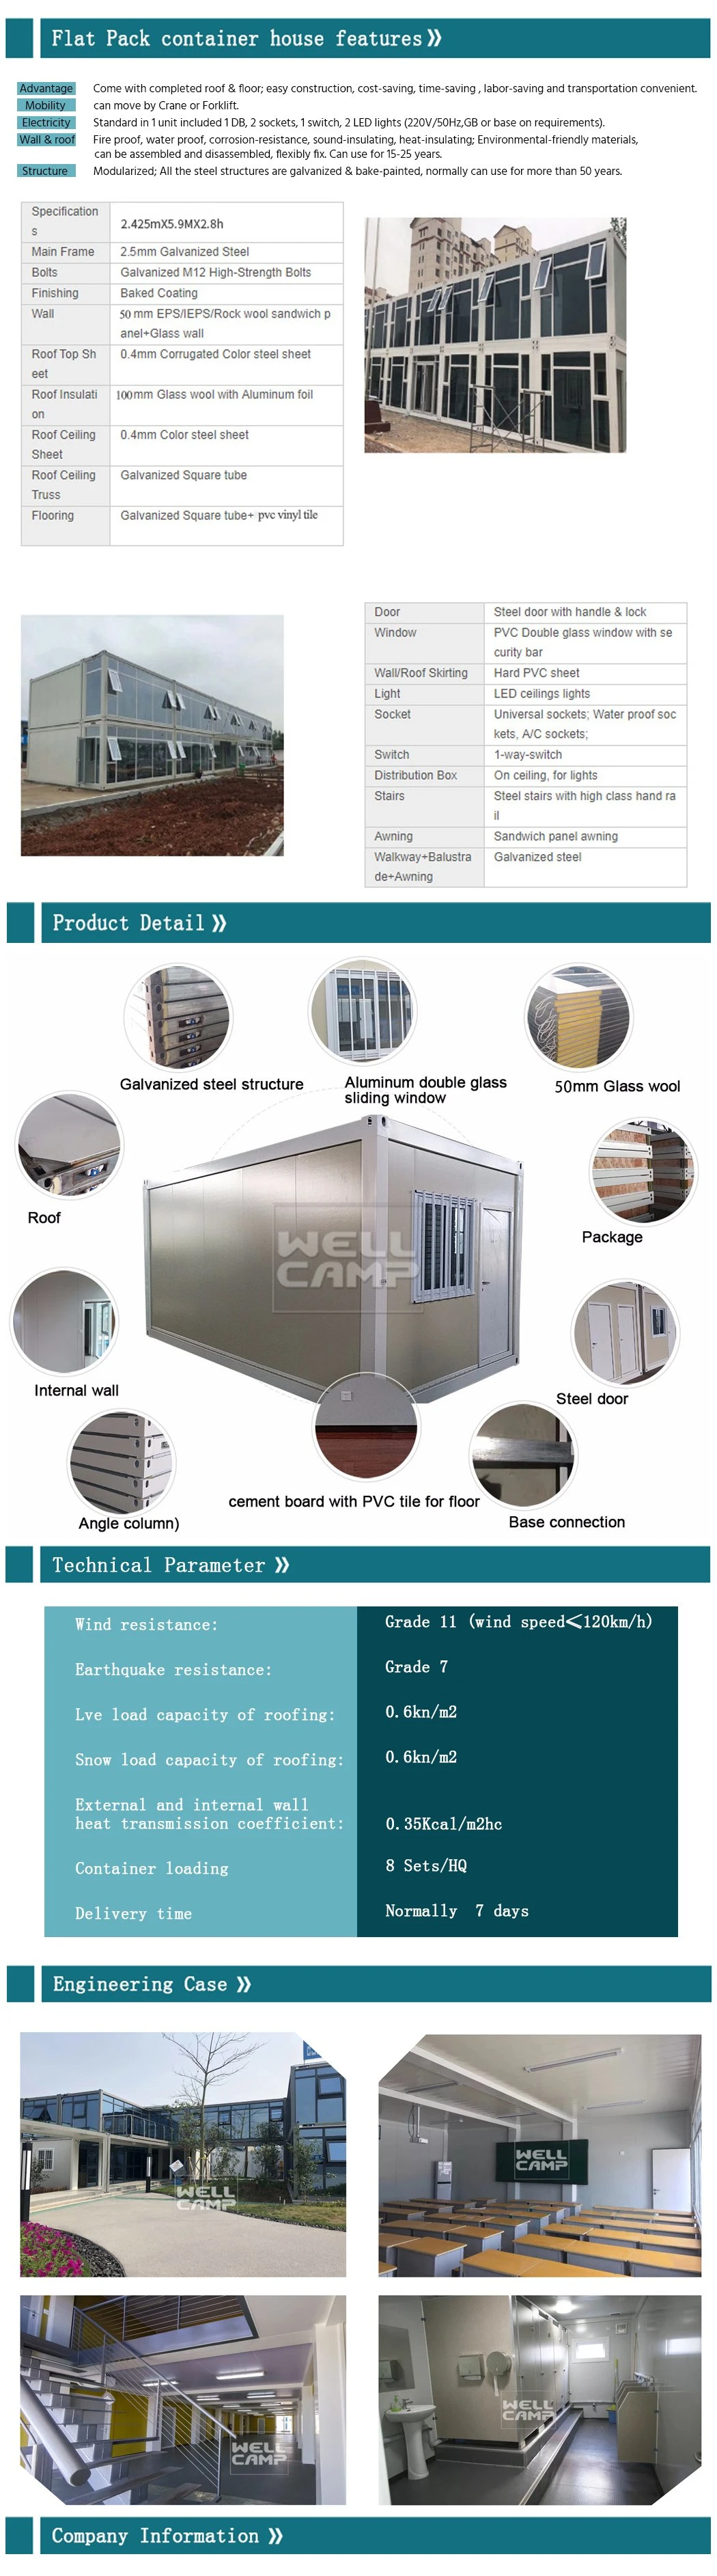 Prefabricated Fast Build Economic Moveable Site Dorm Modular Container Dormitory for Stuff Shipping Container Office